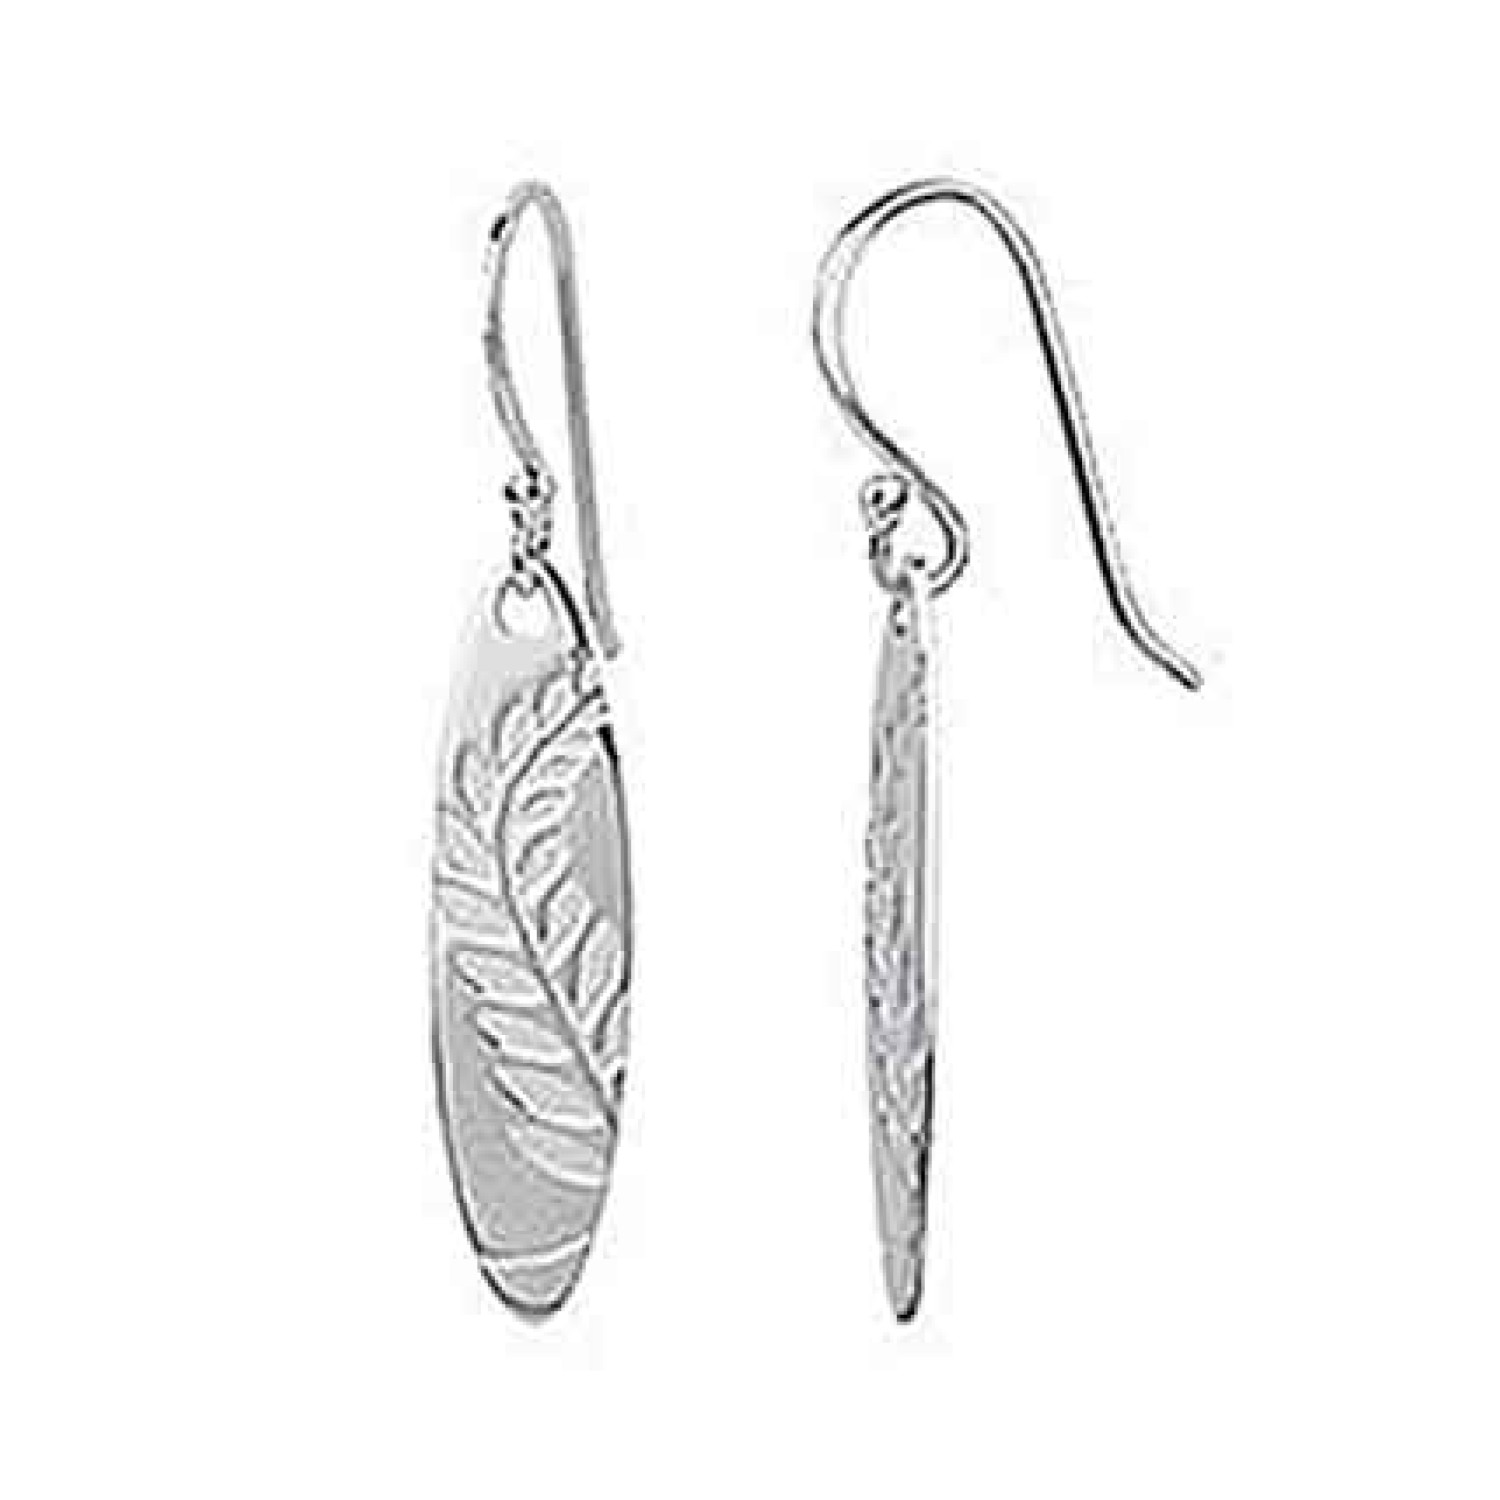 3E31029 Evolve Native Fern Drop Earrings. The celebrated outline of our native New Zealand fern embodies a sense of pride and respect for New Zealands unique culture and natural beauty. Few nations are as fiercely loyal and vocally proud of their heritage